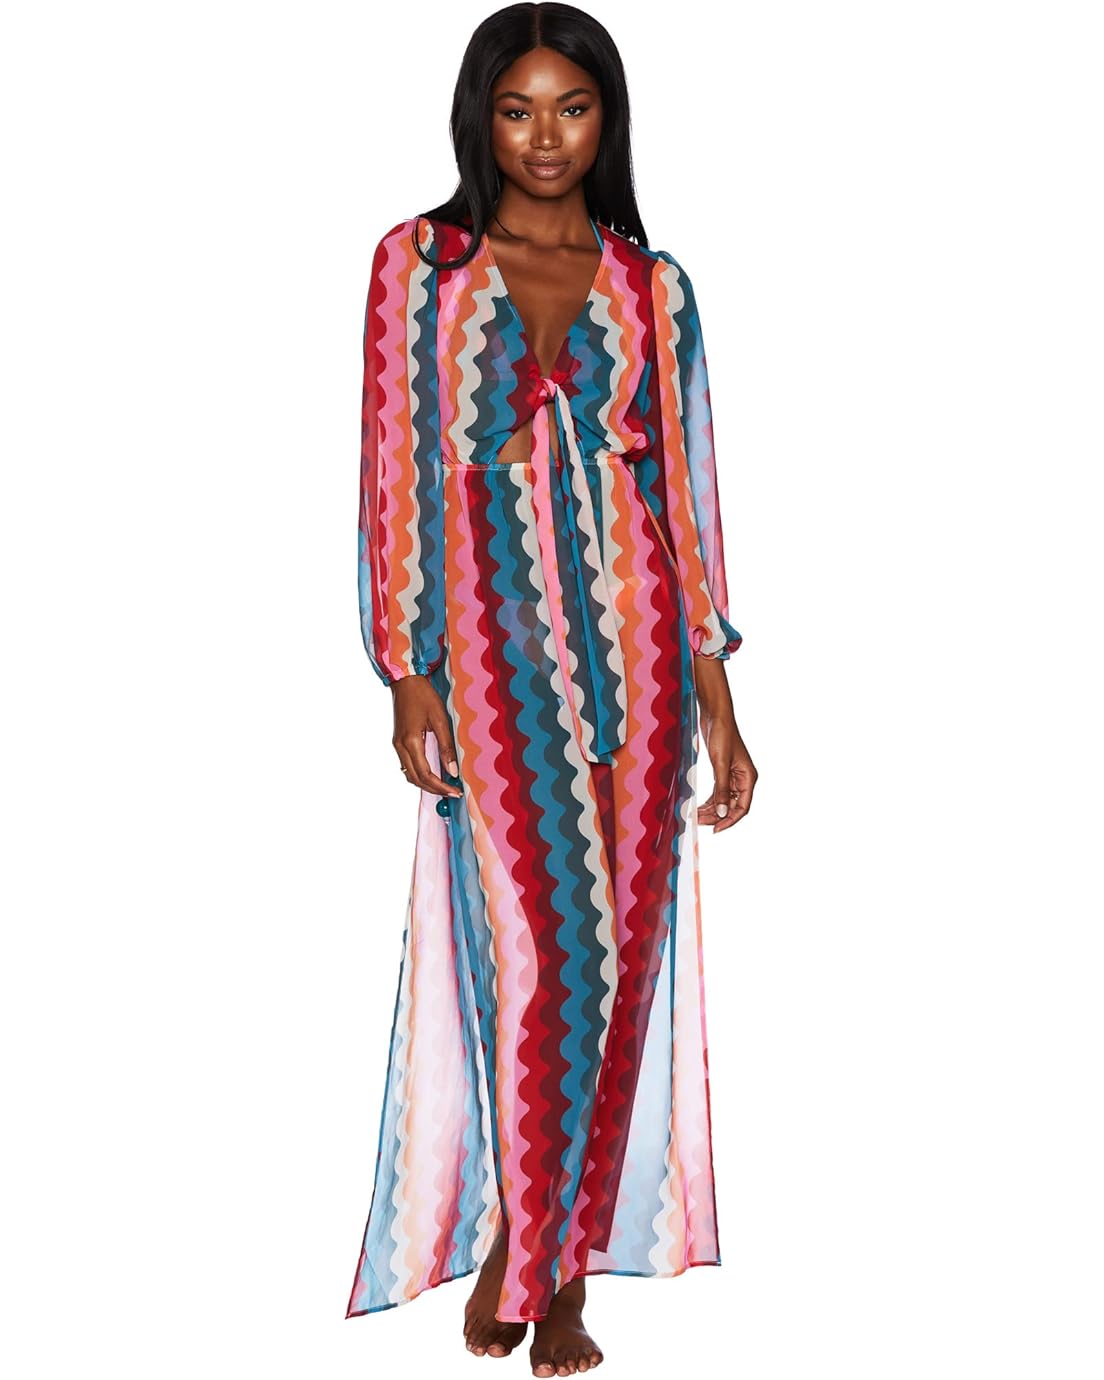 Beach Riot Shiloh Cover-Up